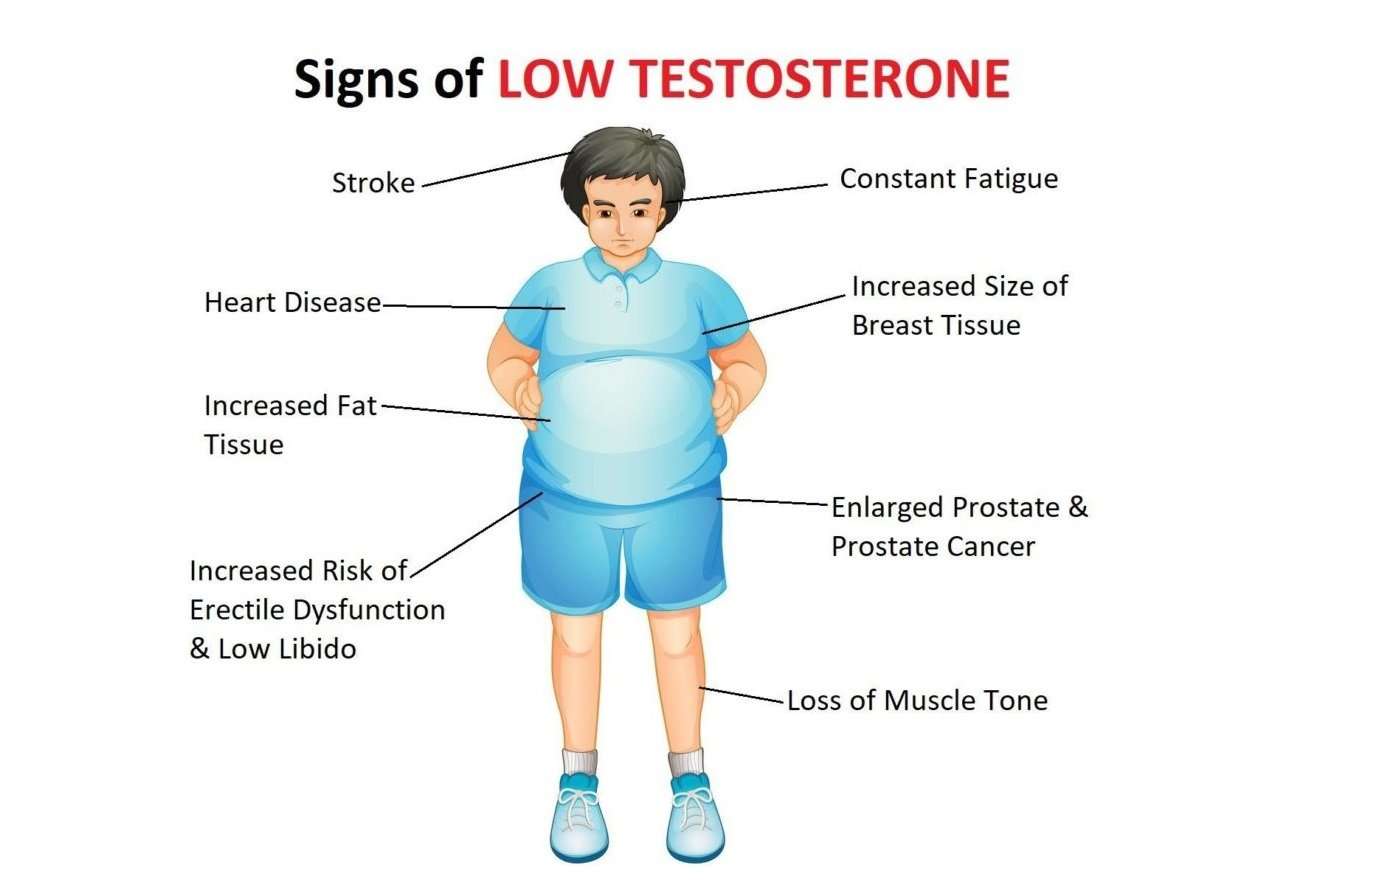 How Do I Know If I Have Low Testosterone?